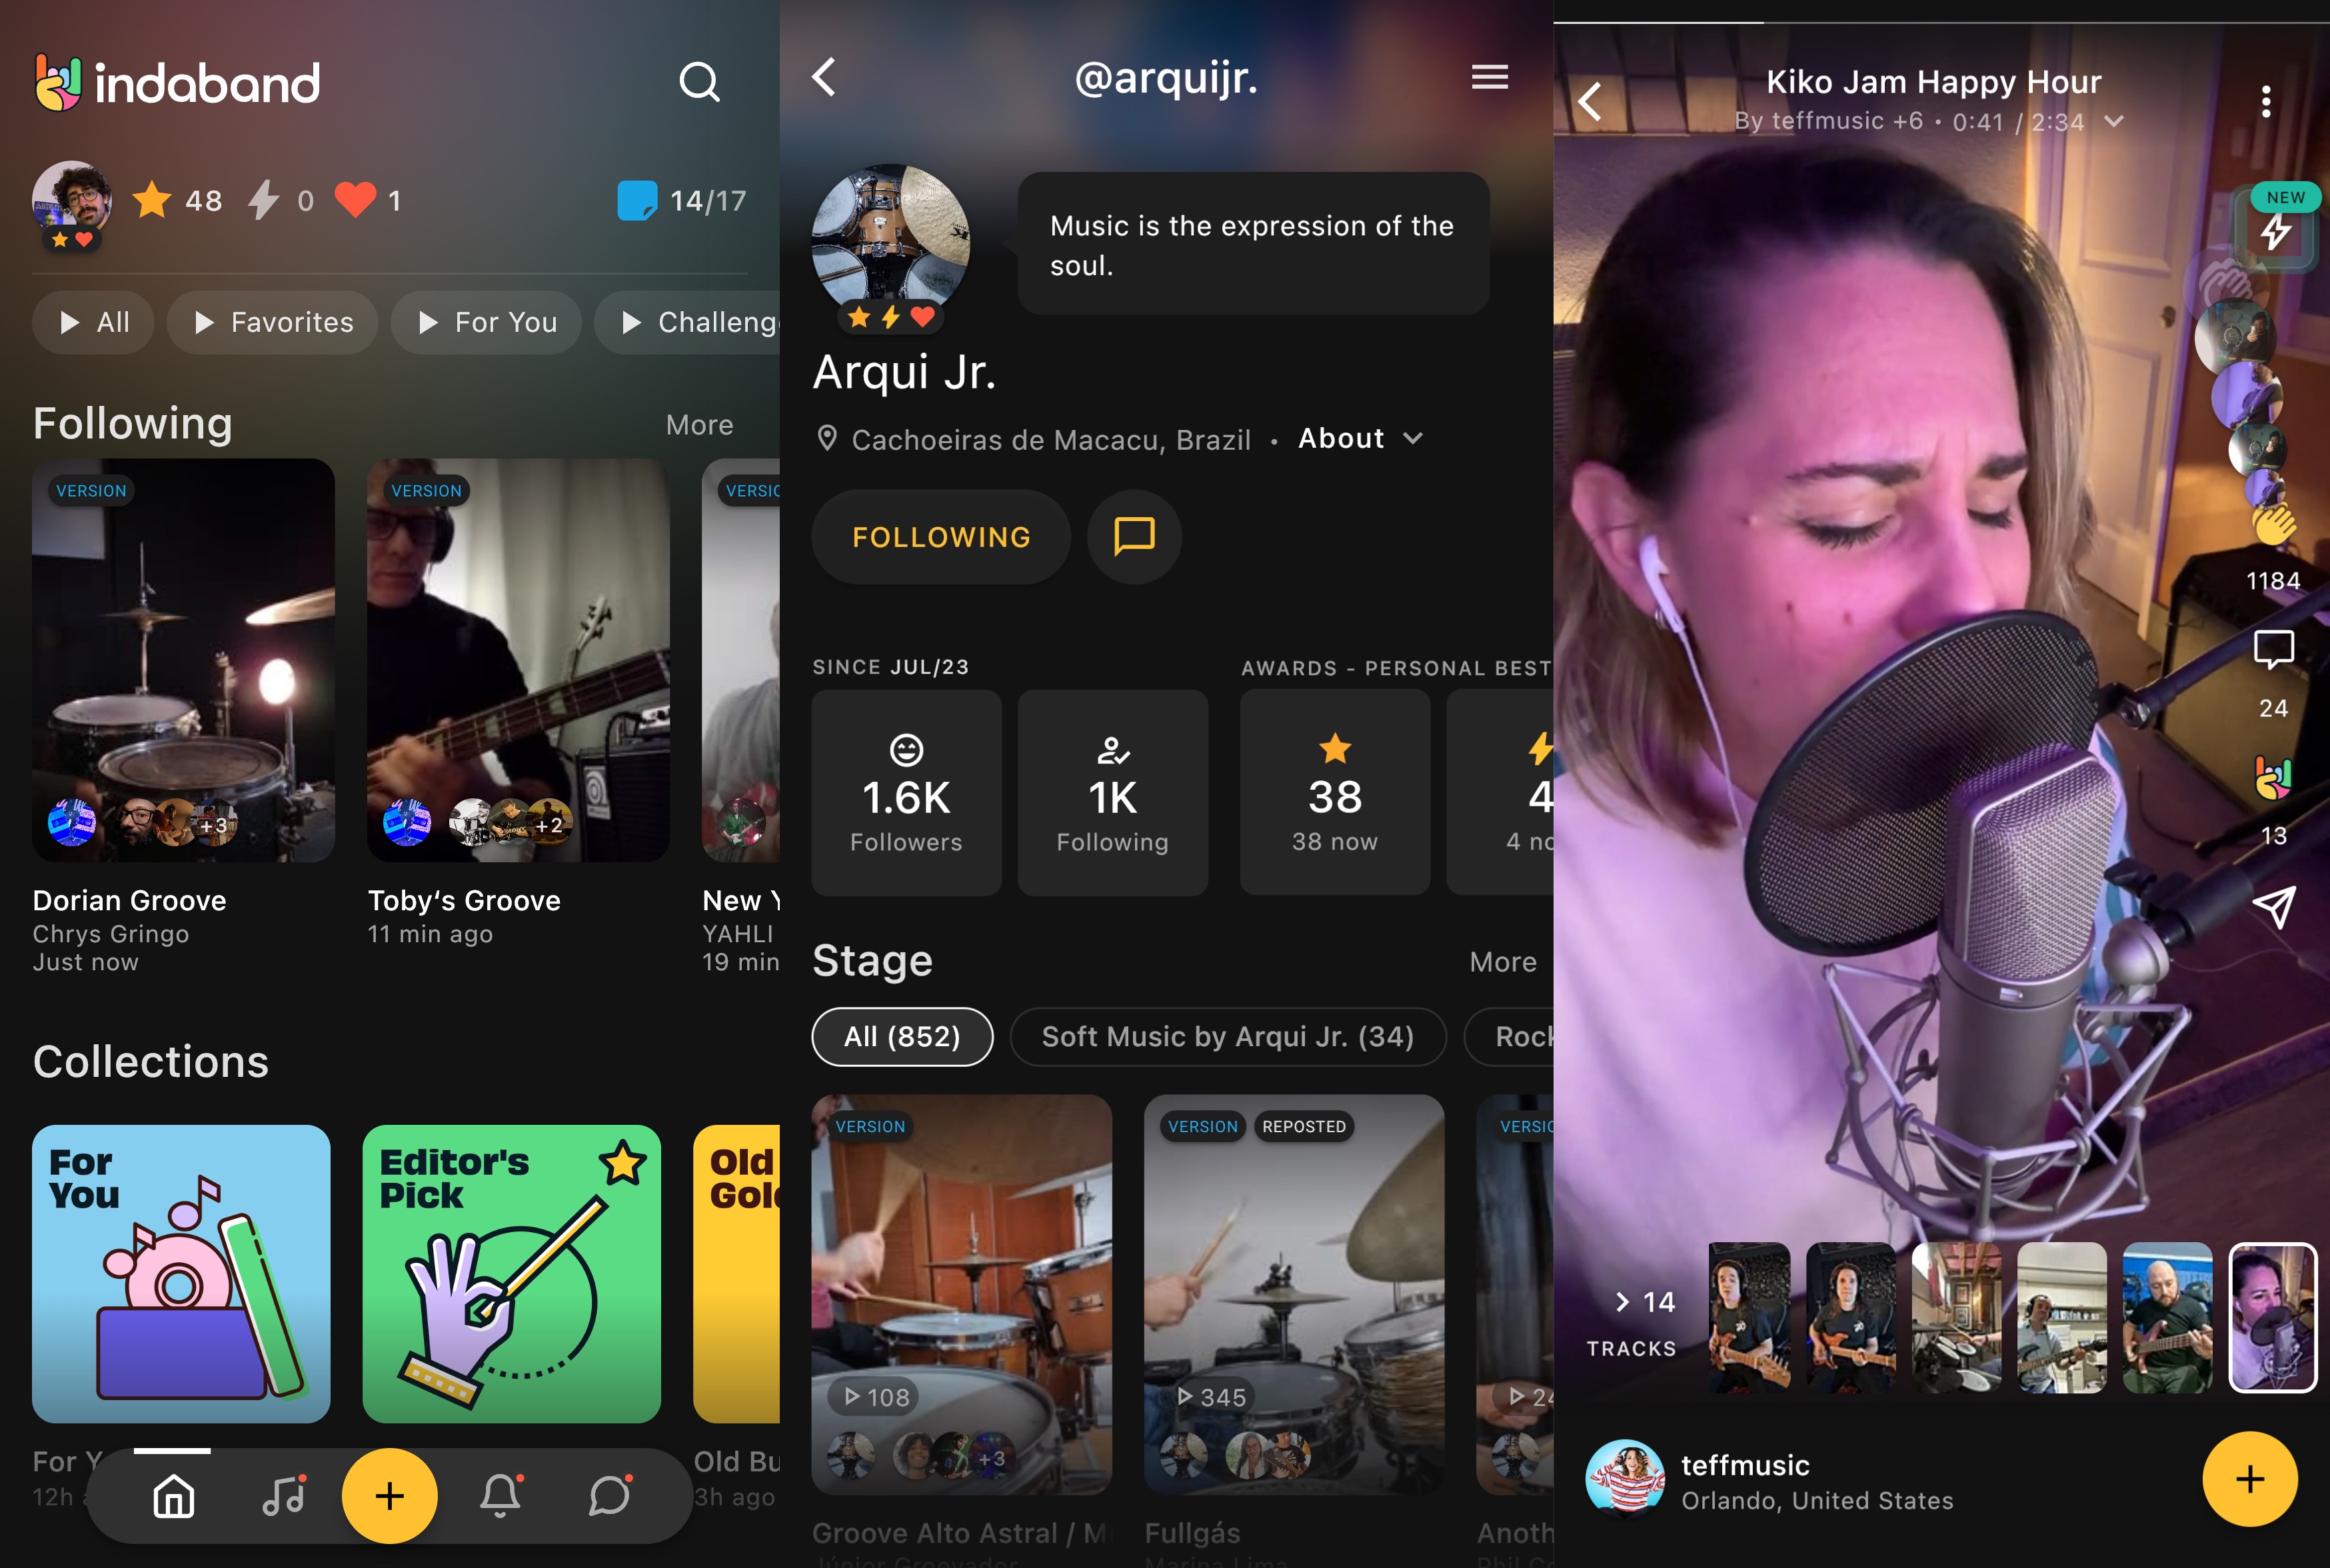 Indaband’s new app lets you create music with people around the world